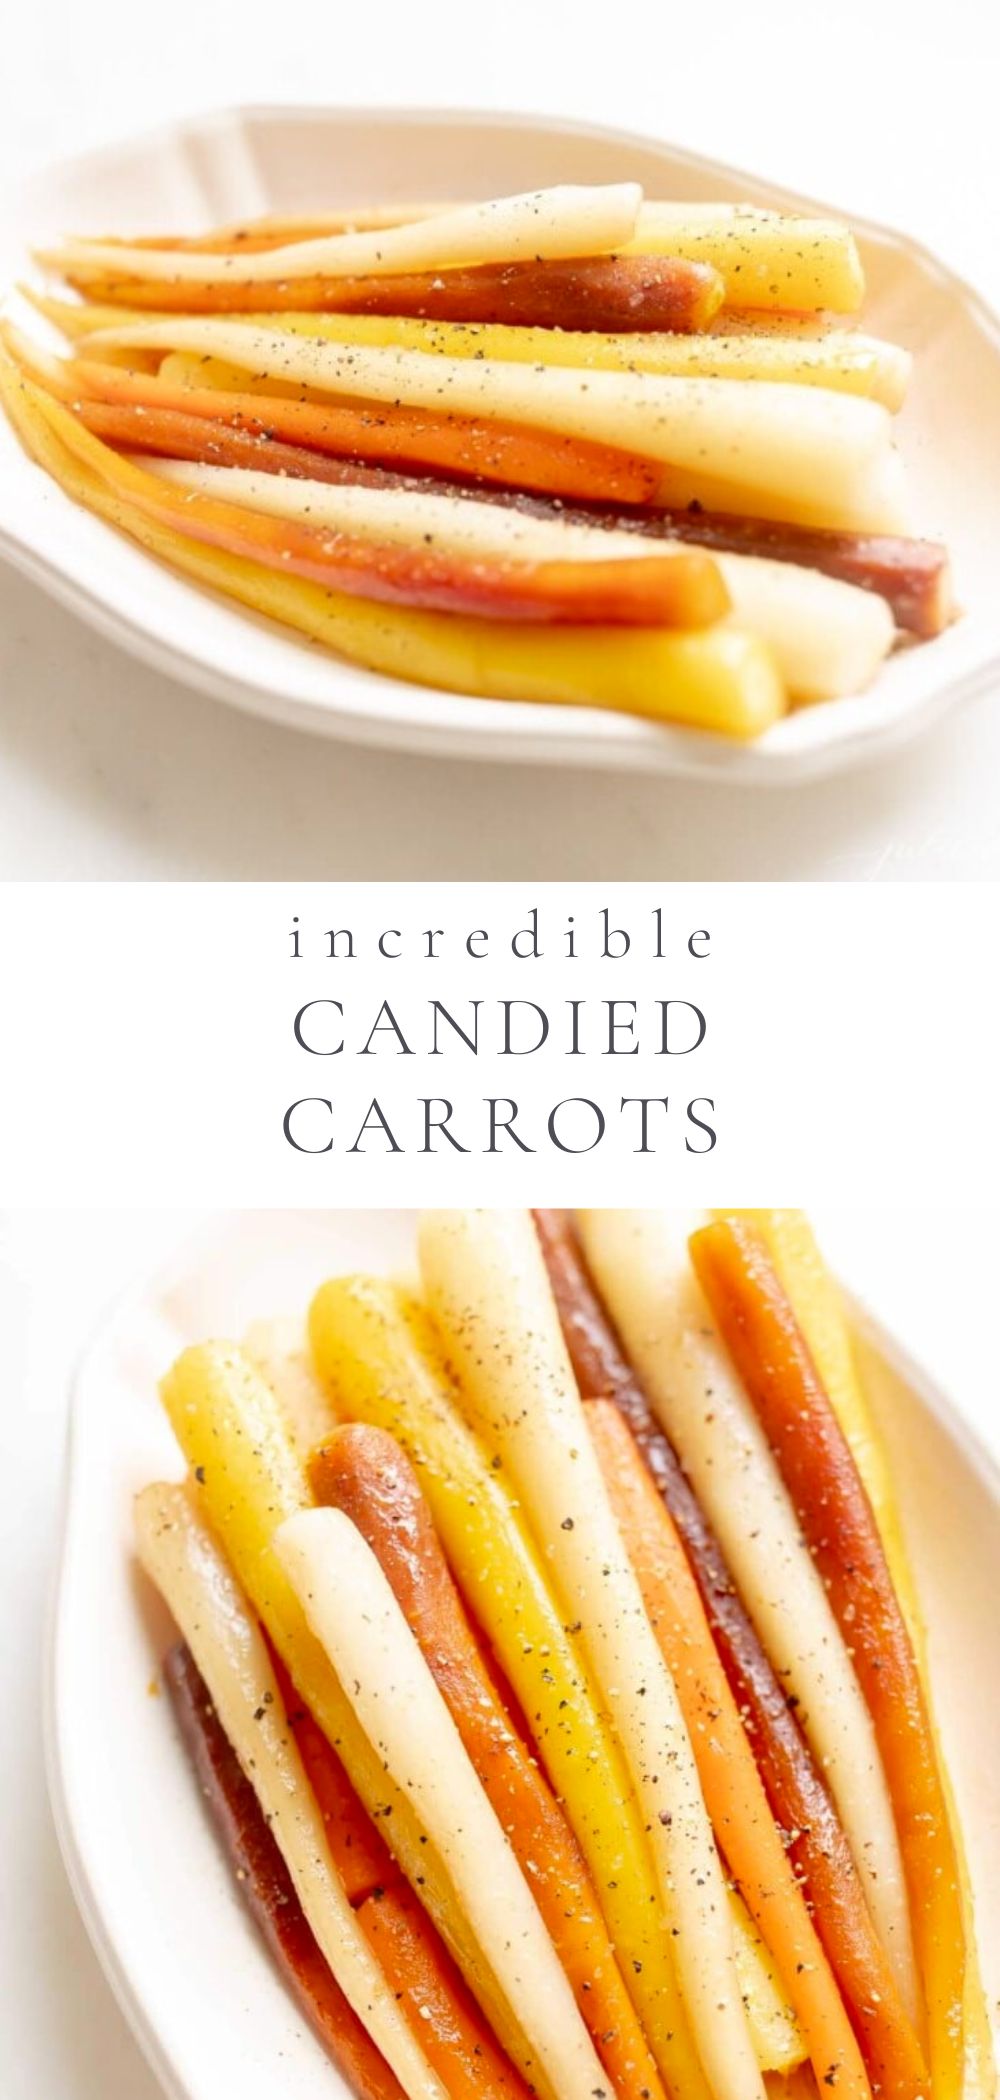 Colorful candied carrots are displayed on a white serving dish